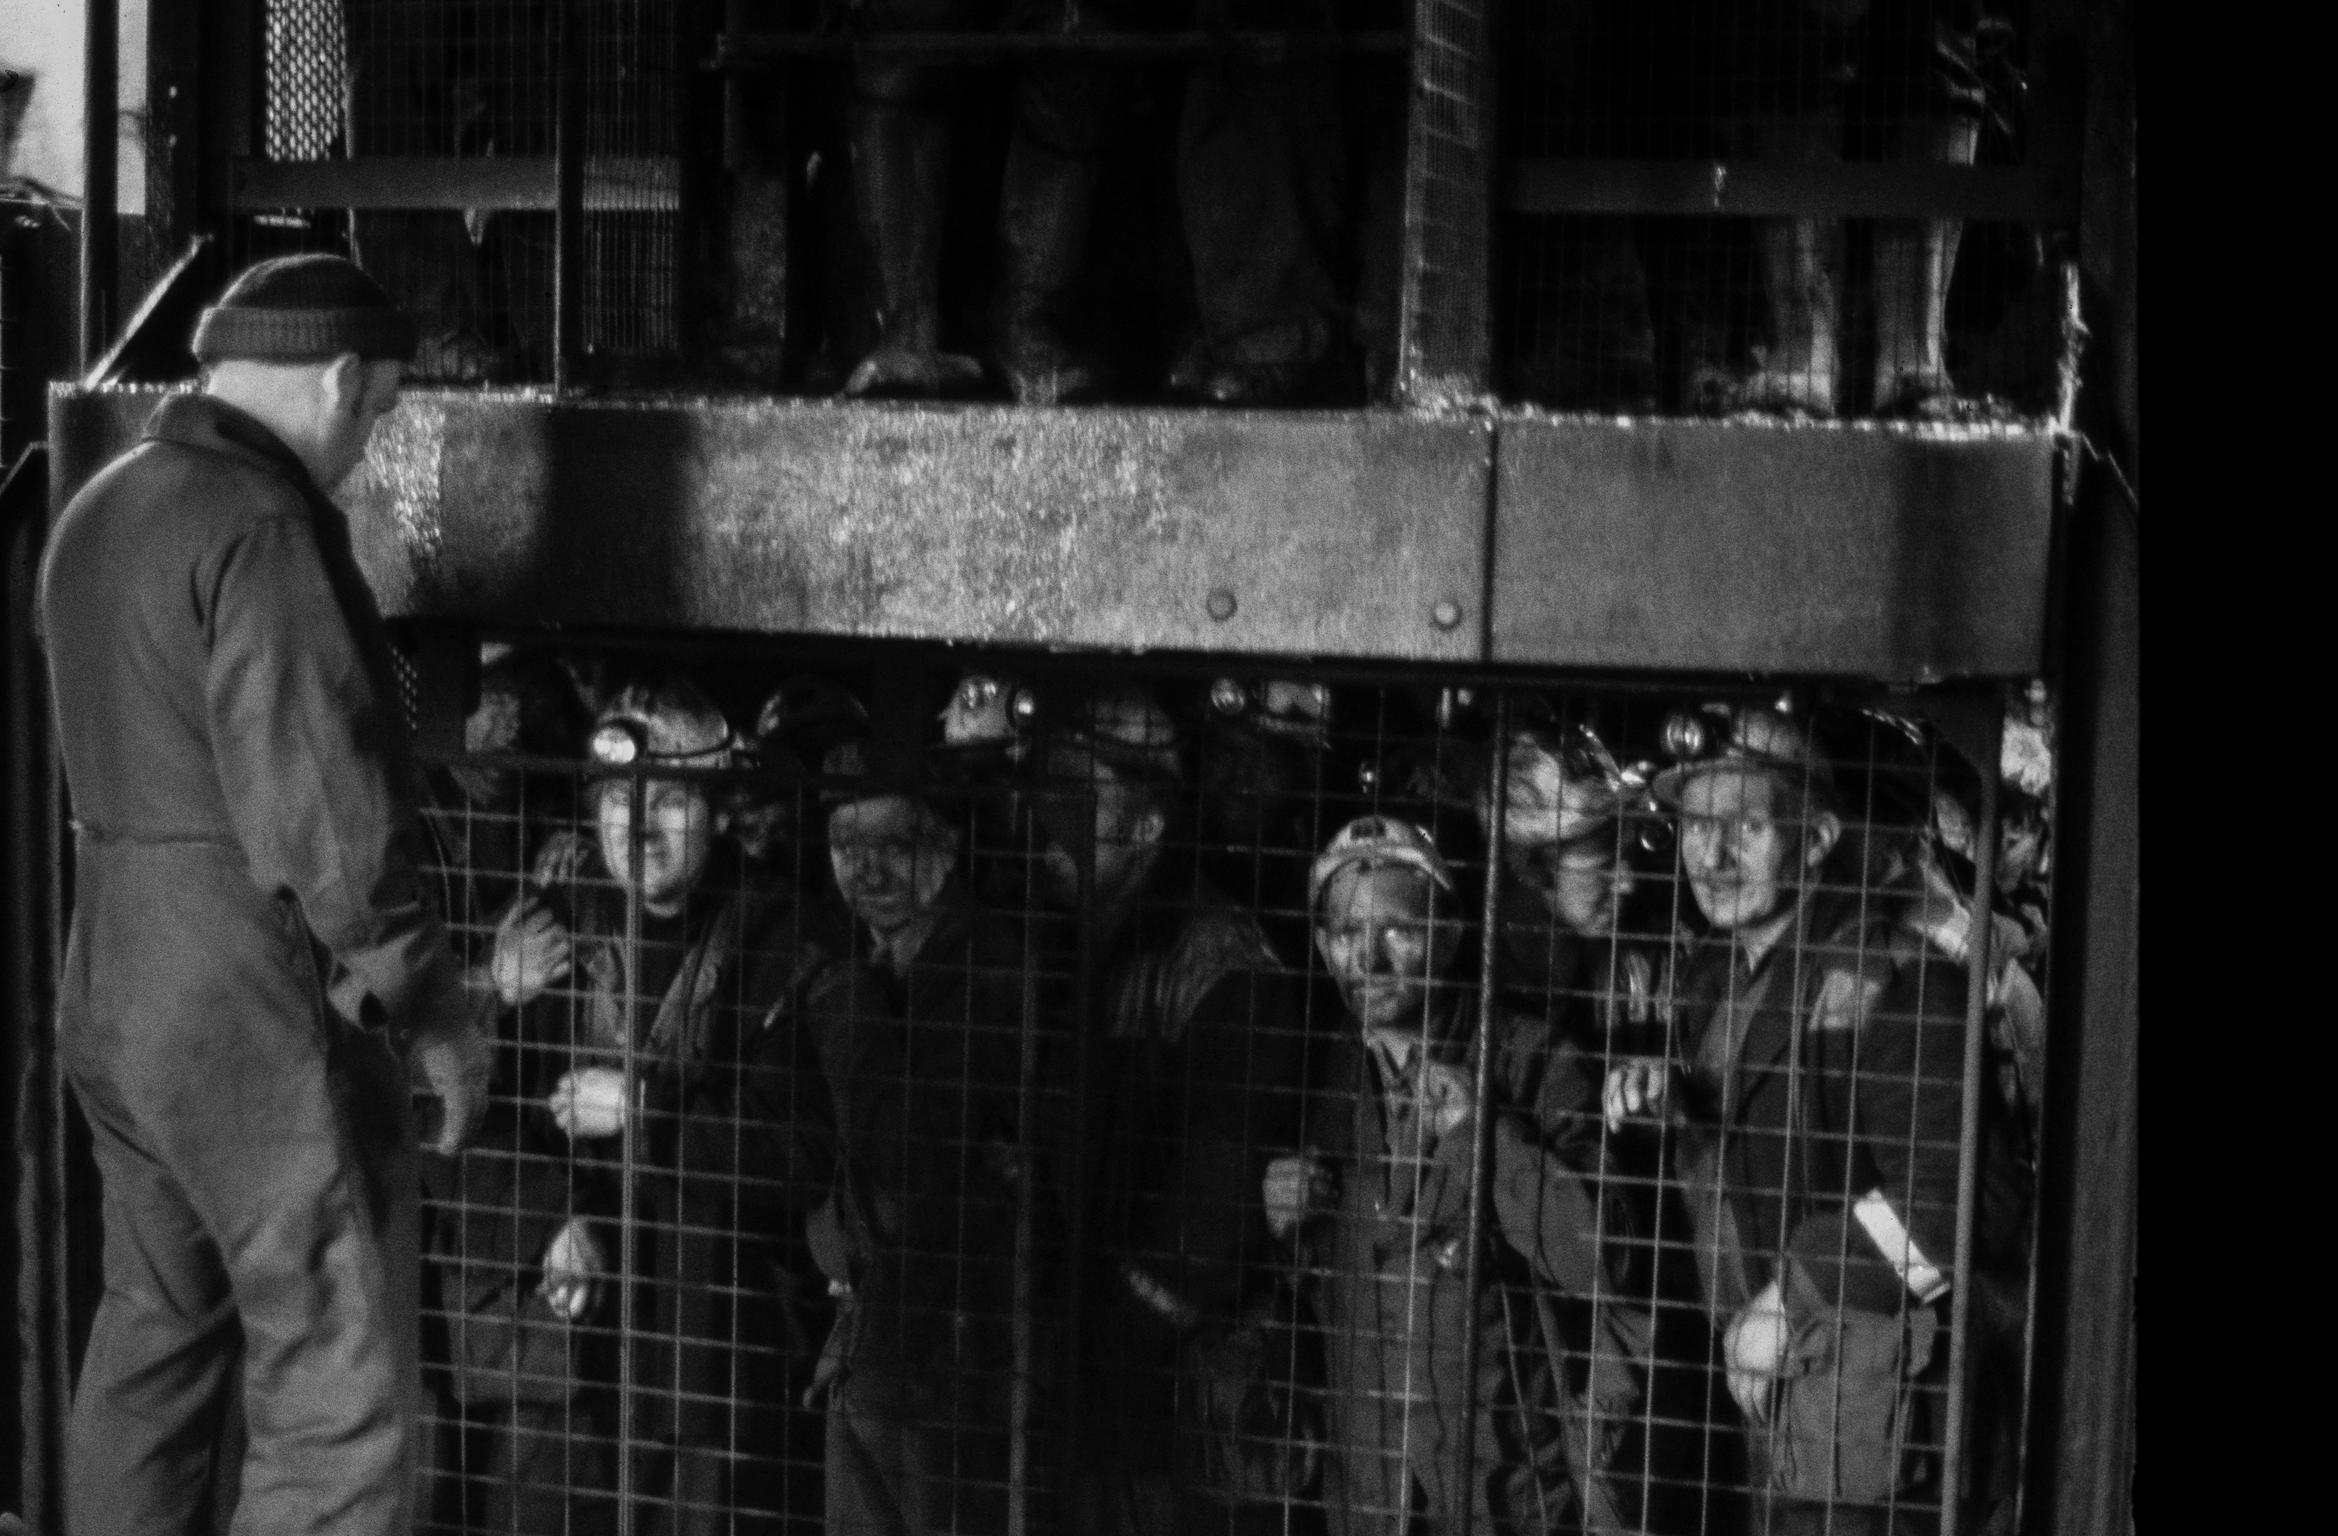 Miners coming up in the cage at the end of a shift. Rhondda Valley, Wales